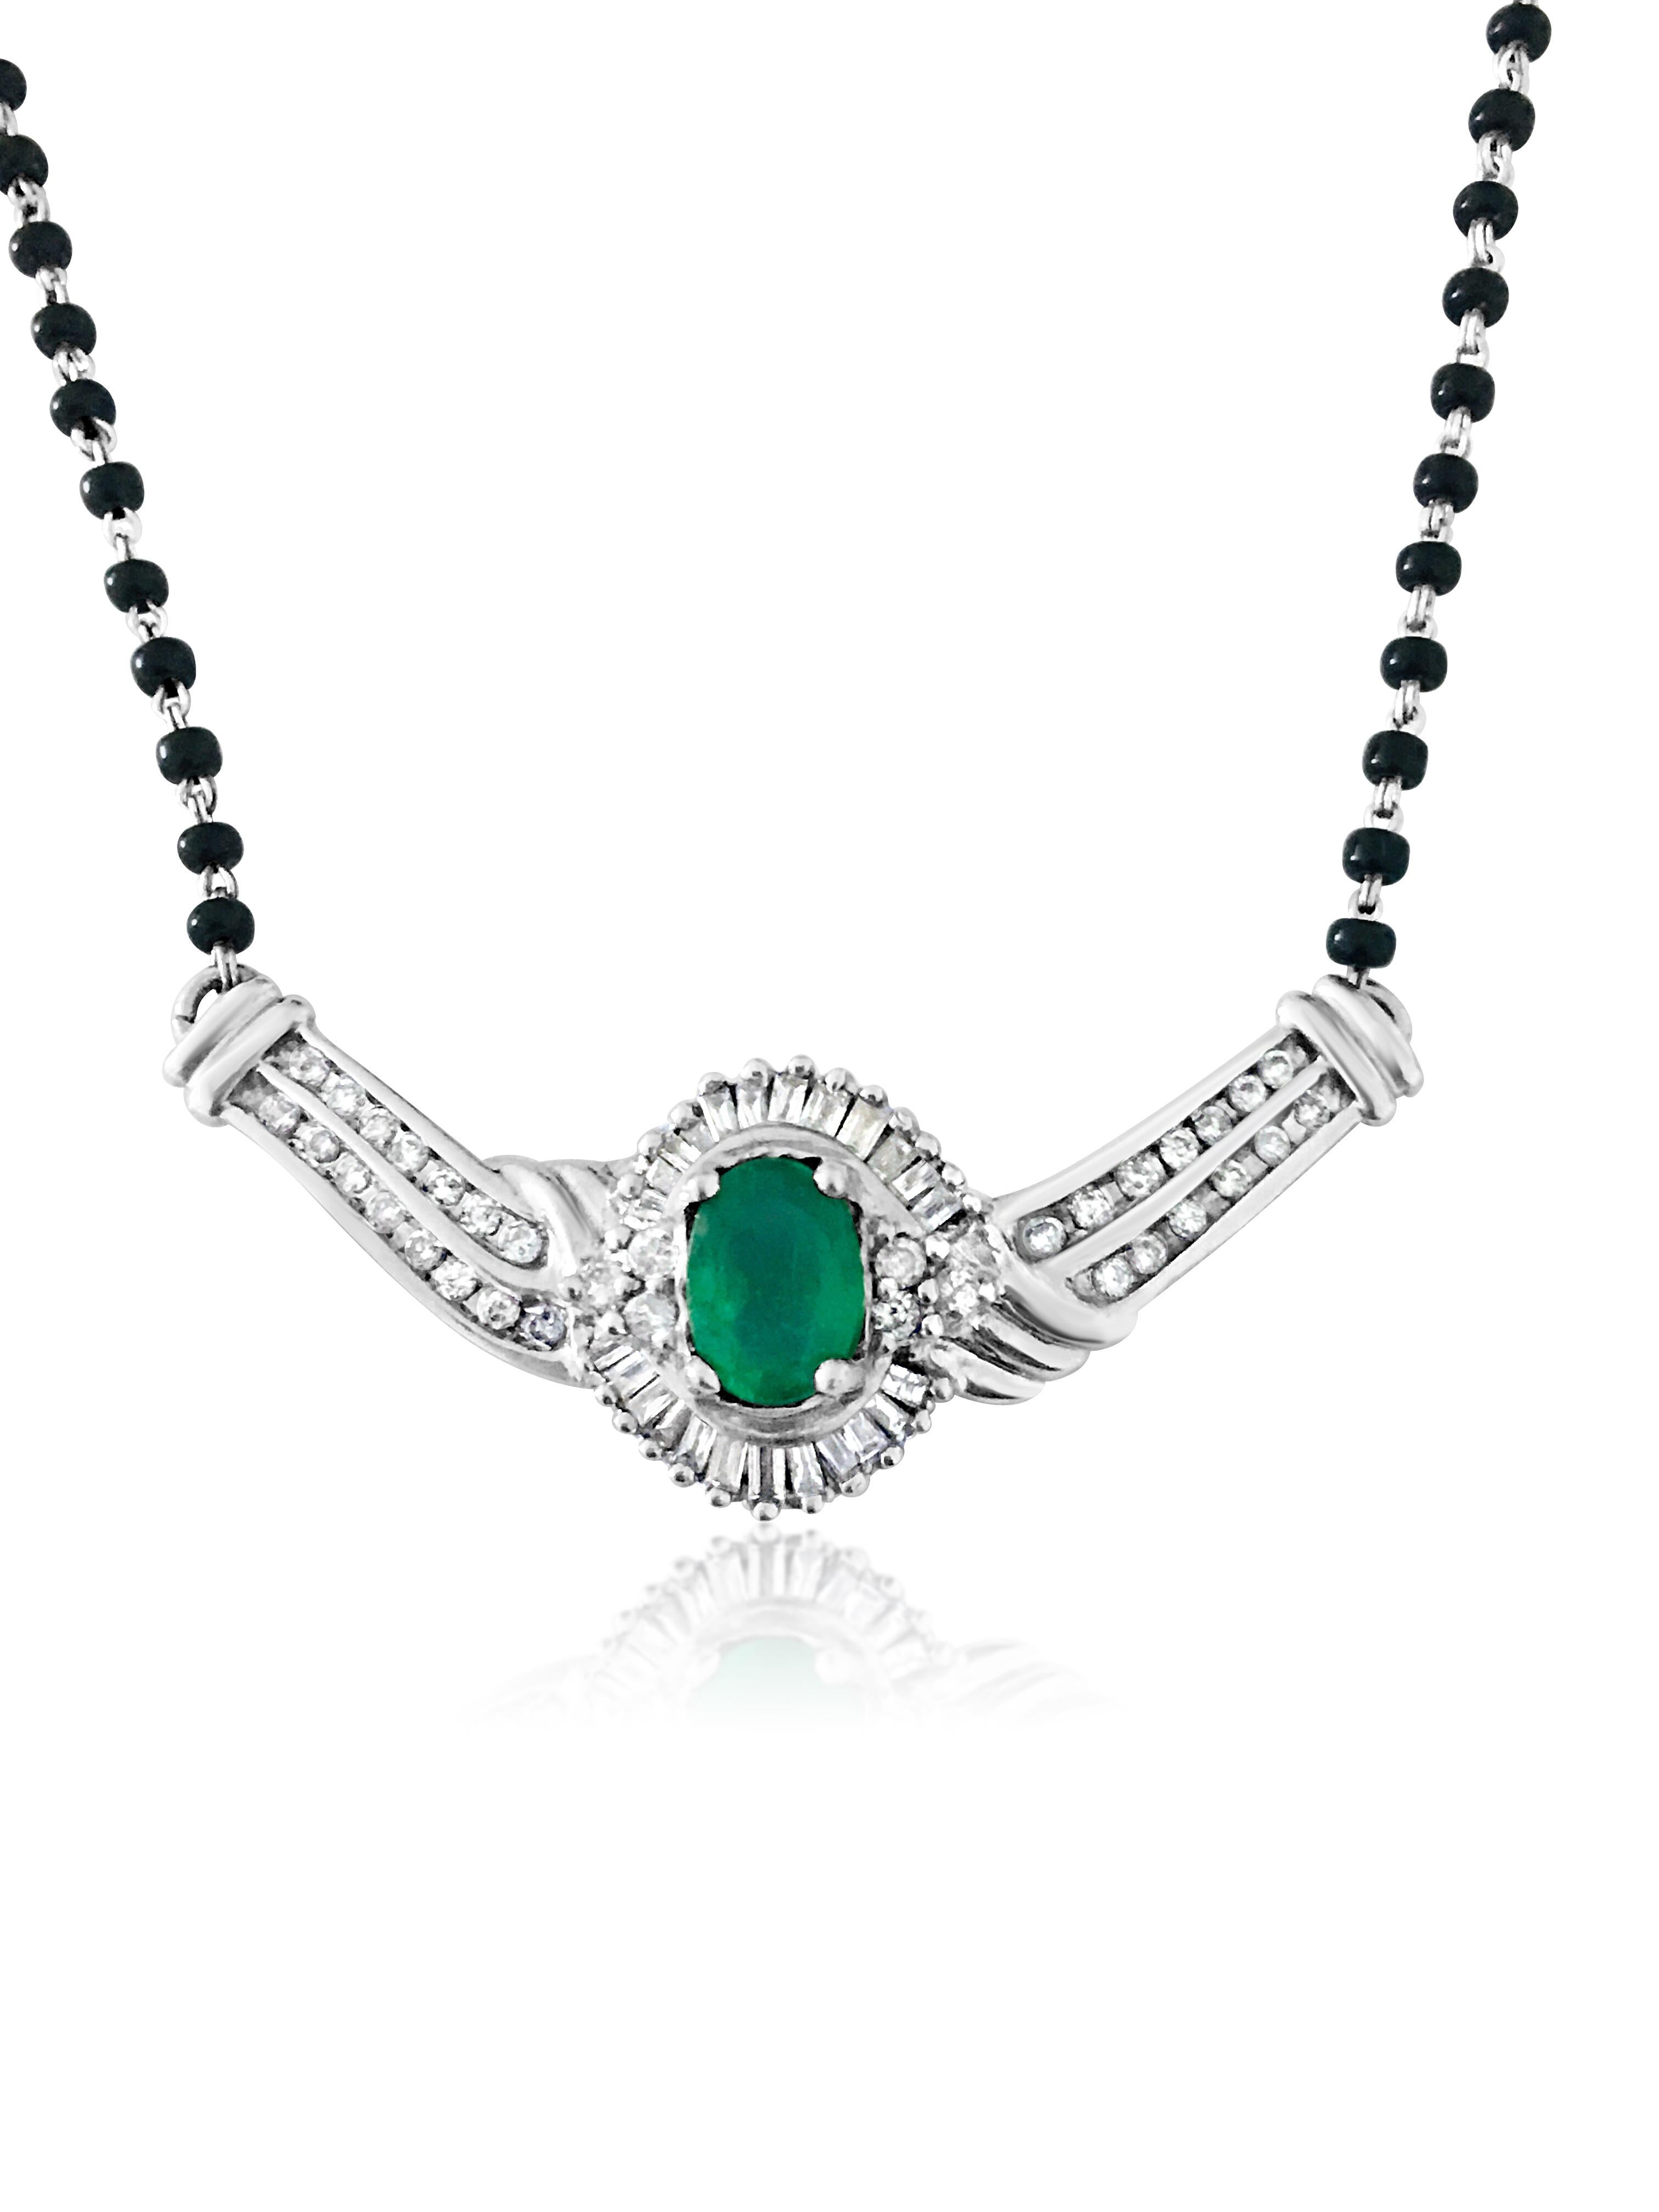 Beautiful Indian jewelry for women made with 14-karat white gold. The necklace features a stunning 3.00-carat Colombian emerald, a natural gemstone mined from the earth. The emerald is cut in an oval shape and securely set in prongs. The diamonds on